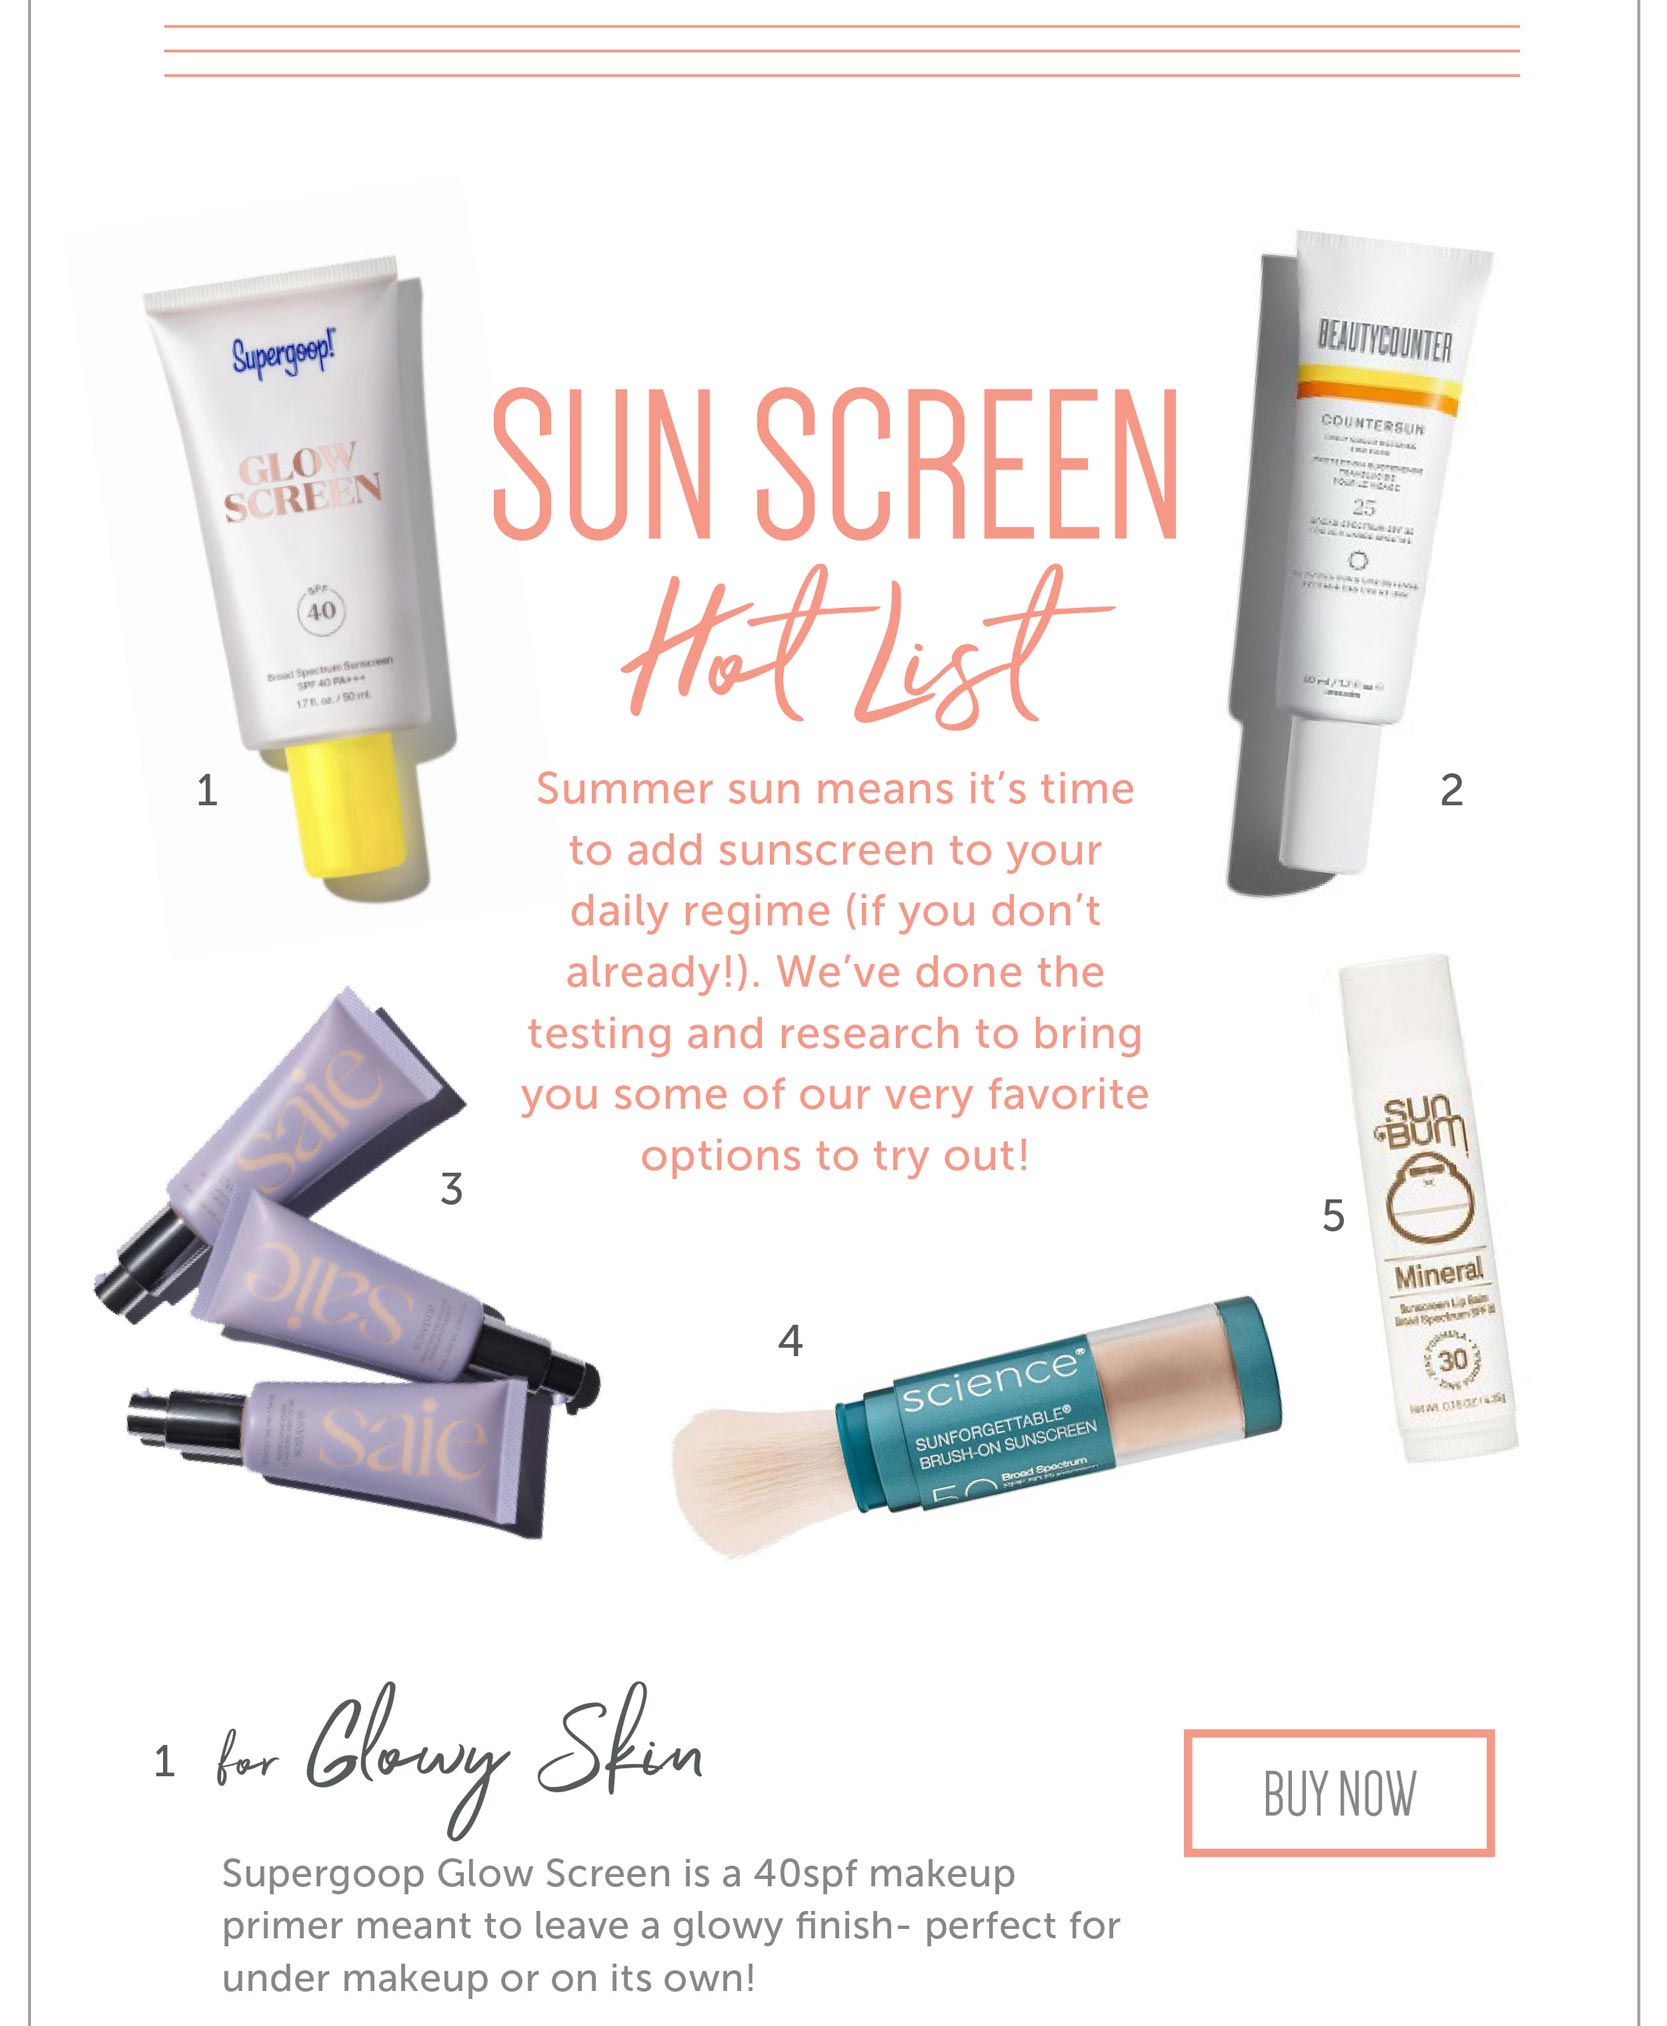 Sun Screen Hot List Summer sun means it’s time to add sunscreen to your daily regime (if you don’t already!). We’ve done the testing and research to bring you some of our very favorite options to try out! For Glowy Skin Supergoop Glow Screen is a 40spf makeup primer meant to leave a glowy finish- perfect for under makeup or on its own!